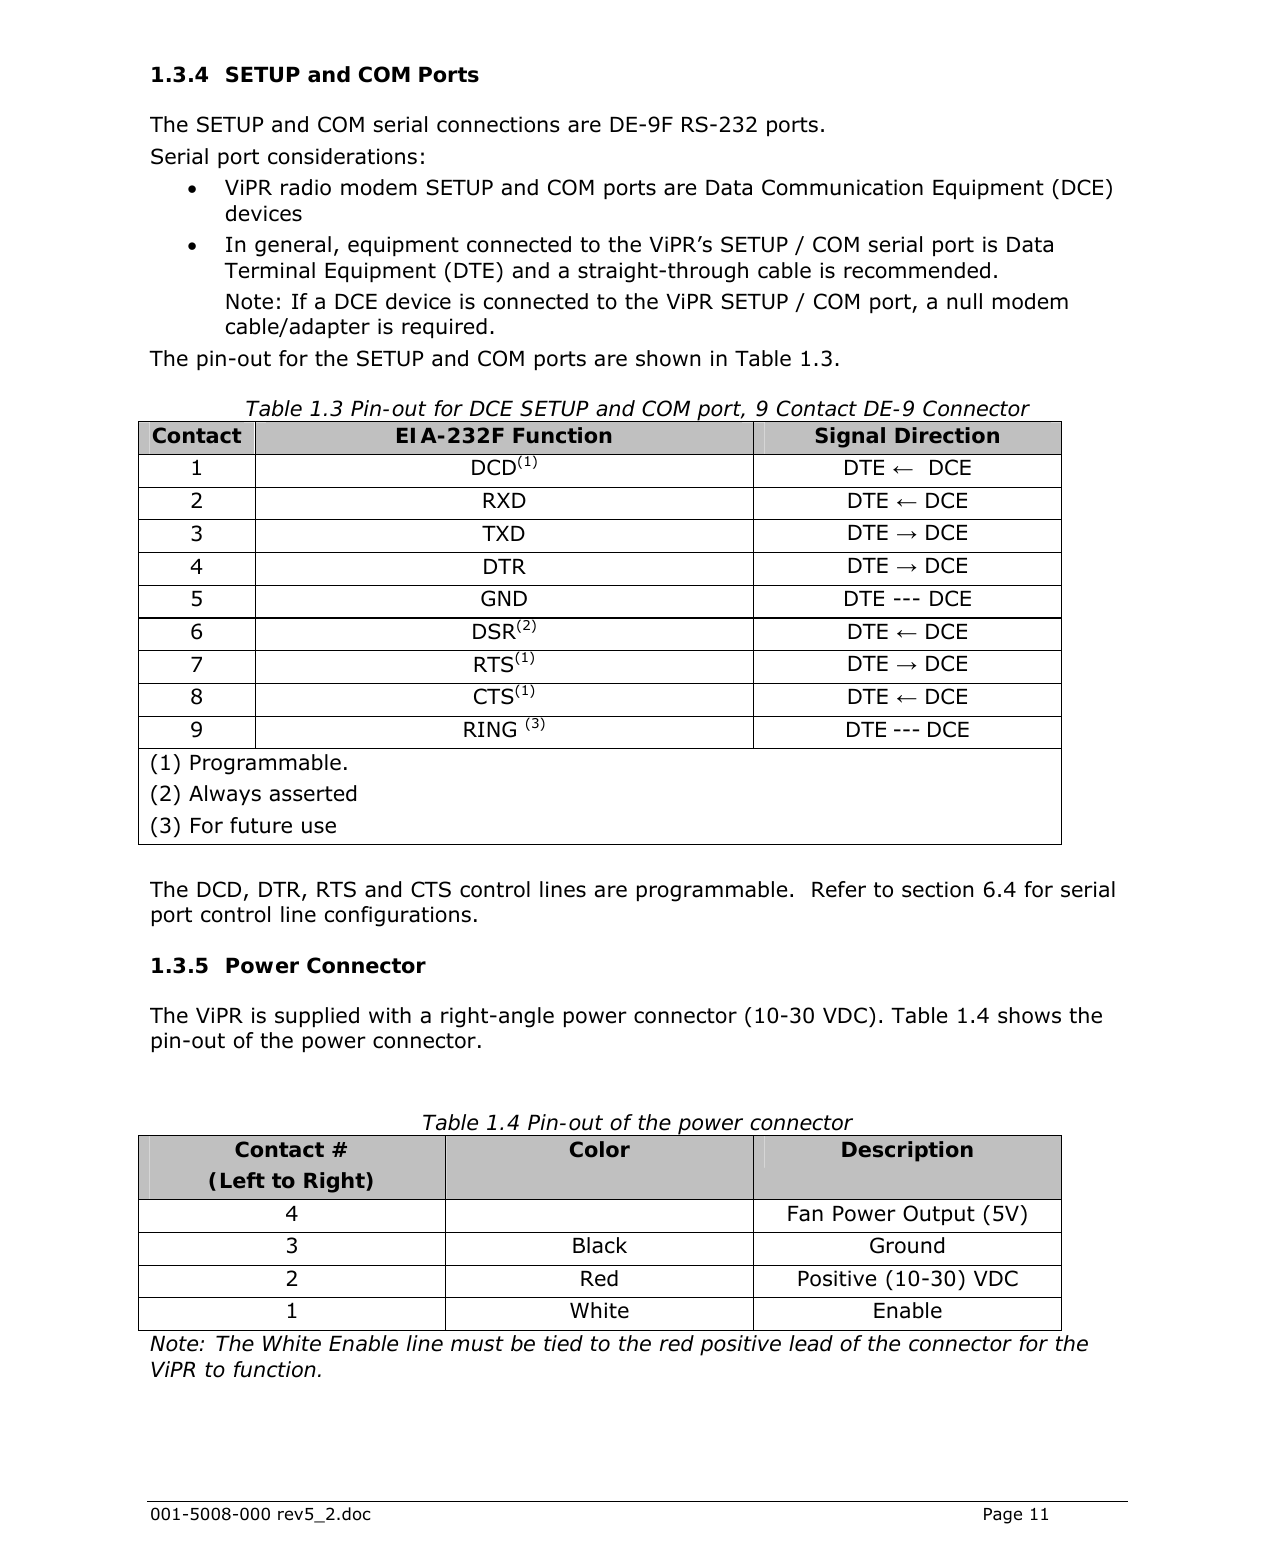  001-5008-000 rev5_2.doc    Page 11 1.3.4 SETUP and COM Ports The SETUP and COM serial connections are DE-9F RS-232 ports. Serial port considerations:    • ViPR radio modem SETUP and COM ports are Data Communication Equipment (DCE) devices • In general, equipment connected to the ViPR’s SETUP / COM serial port is Data Terminal Equipment (DTE) and a straight-through cable is recommended.  Note: If a DCE device is connected to the ViPR SETUP / COM port, a null modem cable/adapter is required. The pin-out for the SETUP and COM ports are shown in Table 1.3. Table 1.3 Pin-out for DCE SETUP and COM port, 9 Contact DE-9 Connector Contact  EIA-232F Function  Signal Direction 1 DCD(1)  DTE ←  DCE 2 RXD  DTE ← DCE 3 TXD  DTE → DCE 4 DTR  DTE → DCE 5 GND  DTE --- DCE 6 DSR(2)  DTE ← DCE 7 RTS(1)  DTE → DCE 8 CTS(1)  DTE ← DCE 9 RING (3)  DTE --- DCE (1) Programmable.   (2) Always asserted (3) For future use  The DCD, DTR, RTS and CTS control lines are programmable.  Refer to section 6.4 for serial port control line configurations. 1.3.5 Power Connector The ViPR is supplied with a right-angle power connector (10-30 VDC). Table 1.4 shows the pin-out of the power connector.    Table 1.4 Pin-out of the power connector Contact #  (Left to Right)  Color  Description 4    Fan Power Output (5V) 3 Black Ground 2  Red  Positive (10-30) VDC 1 White Enable  Note: The White Enable line must be tied to the red positive lead of the connector for the ViPR to function.